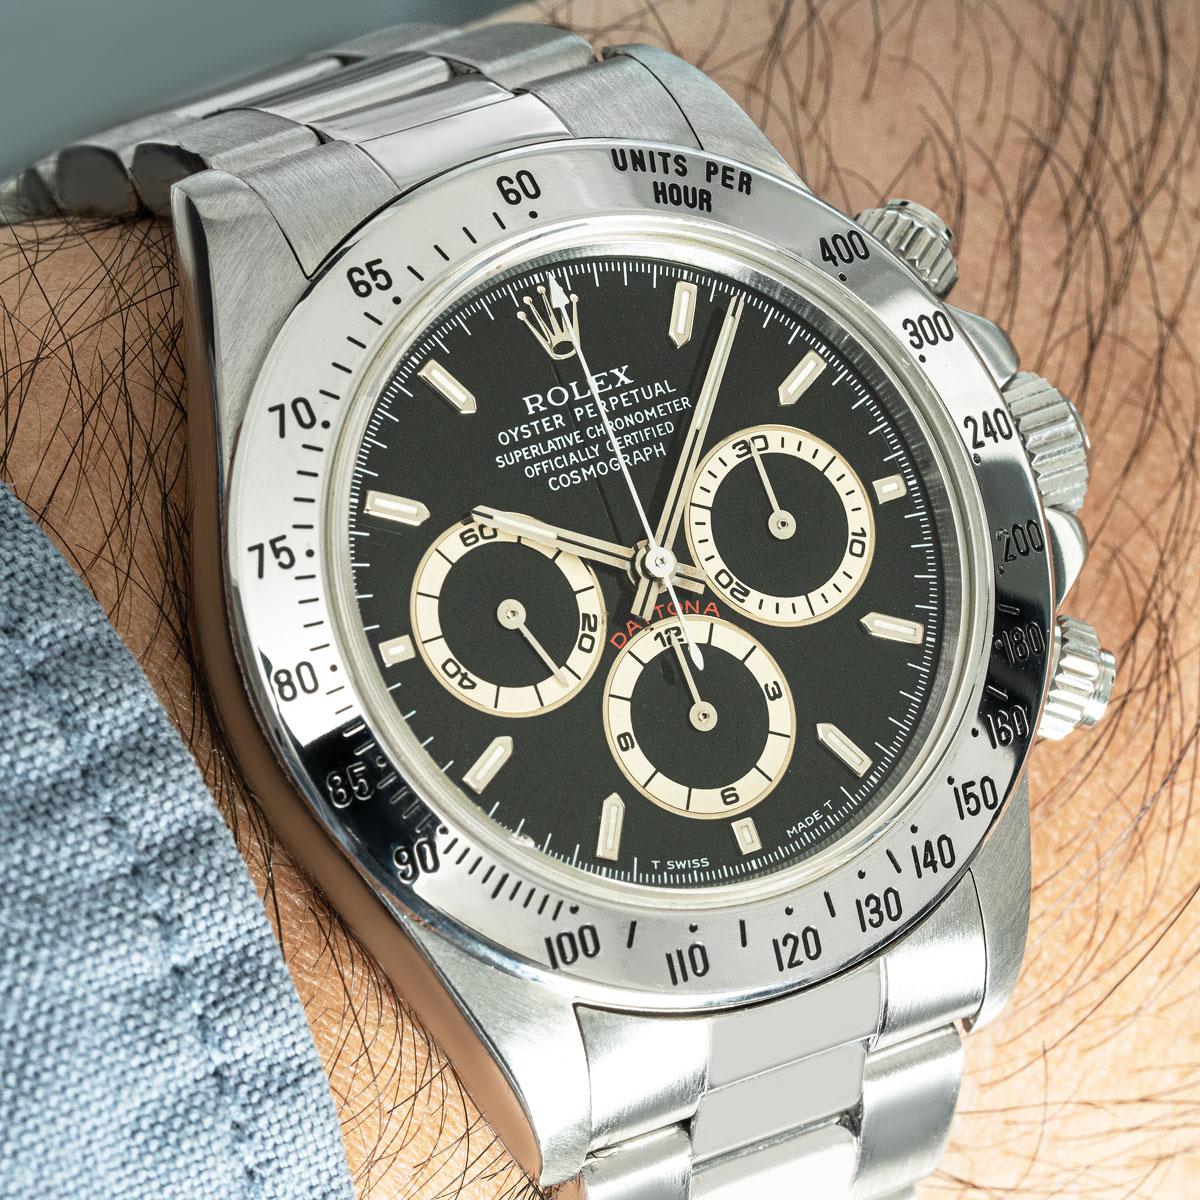 A stainless steel Zenith Daytona by Rolex. The watch features a black dial, an engraved tachymetric scale, three chronograph counters and pushers; features that were designed to make the Daytona the ultimate timing tool for endurance racing